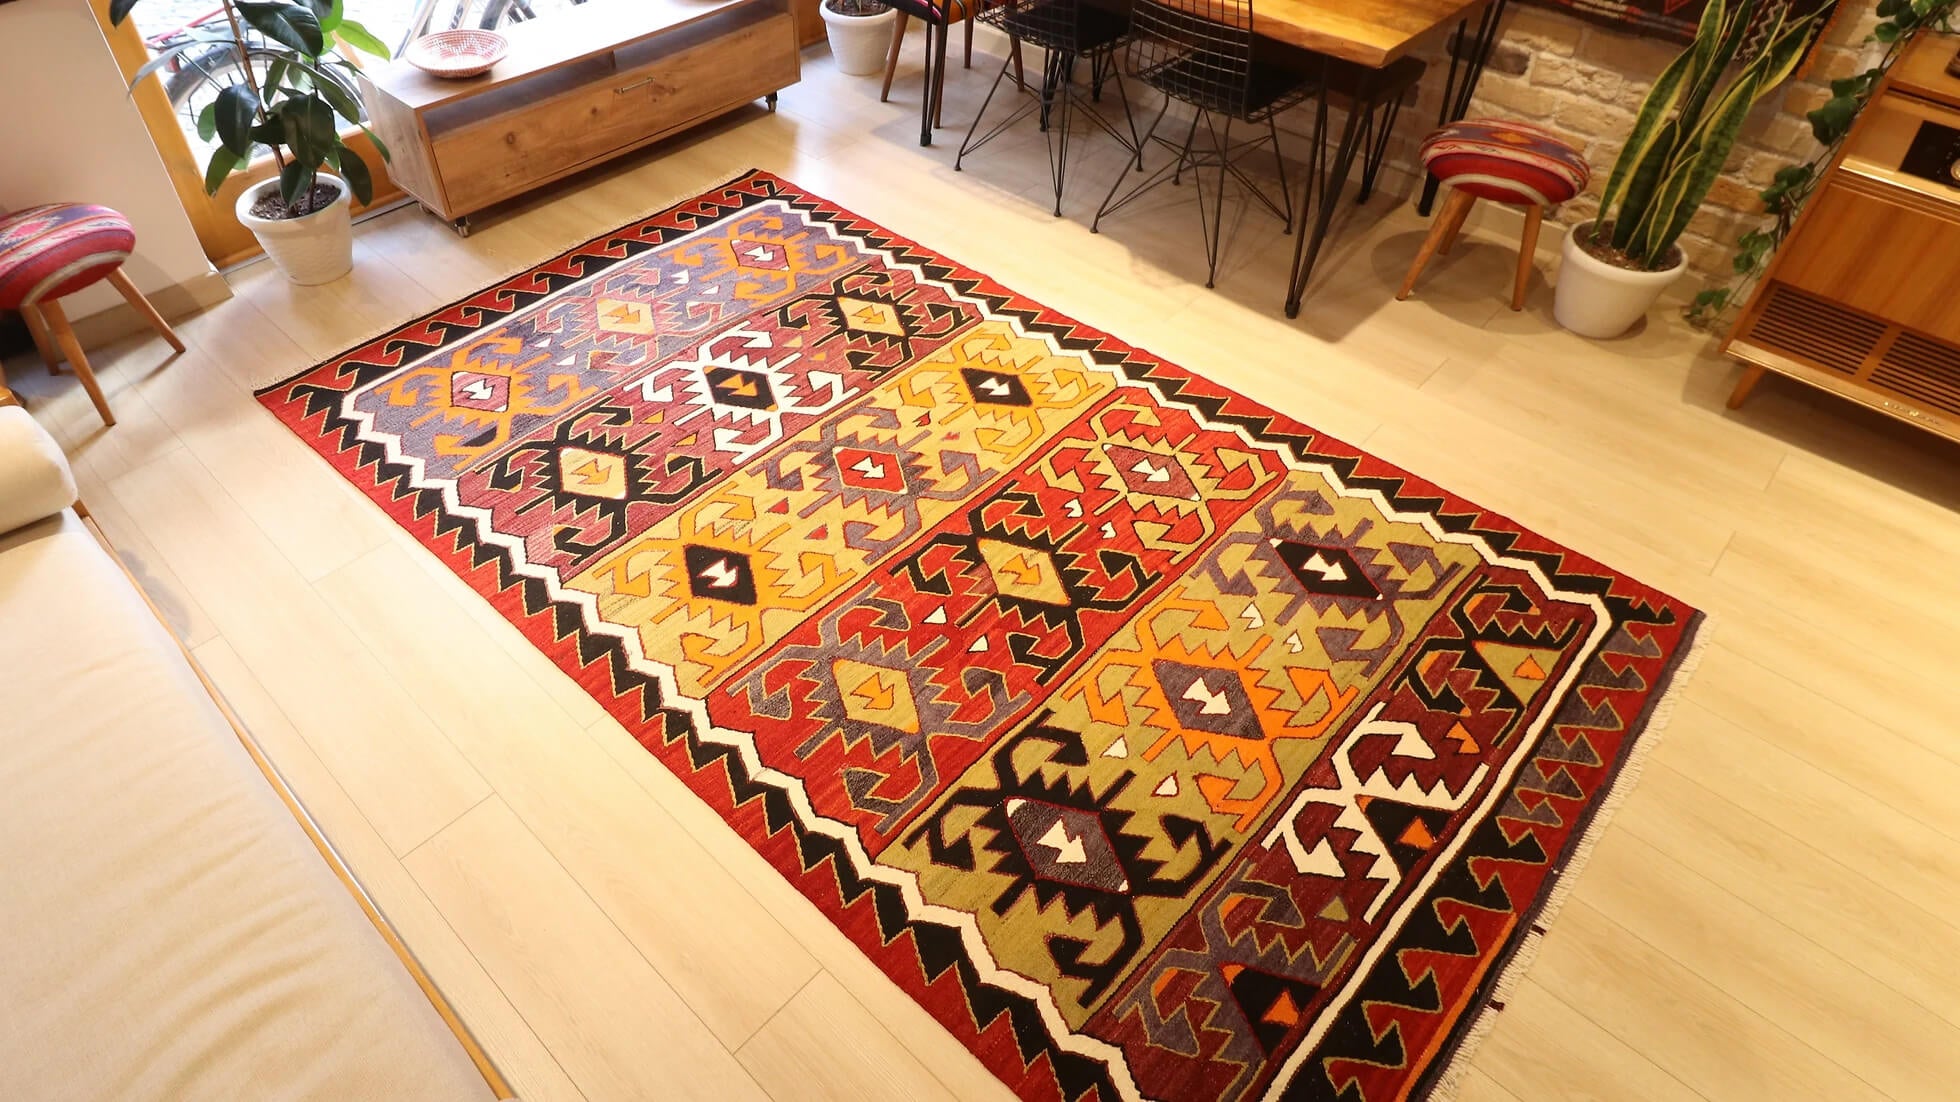 traditional hand-knotted Turkish rug from mid-century in red, black, green, and purple with geometric patterns